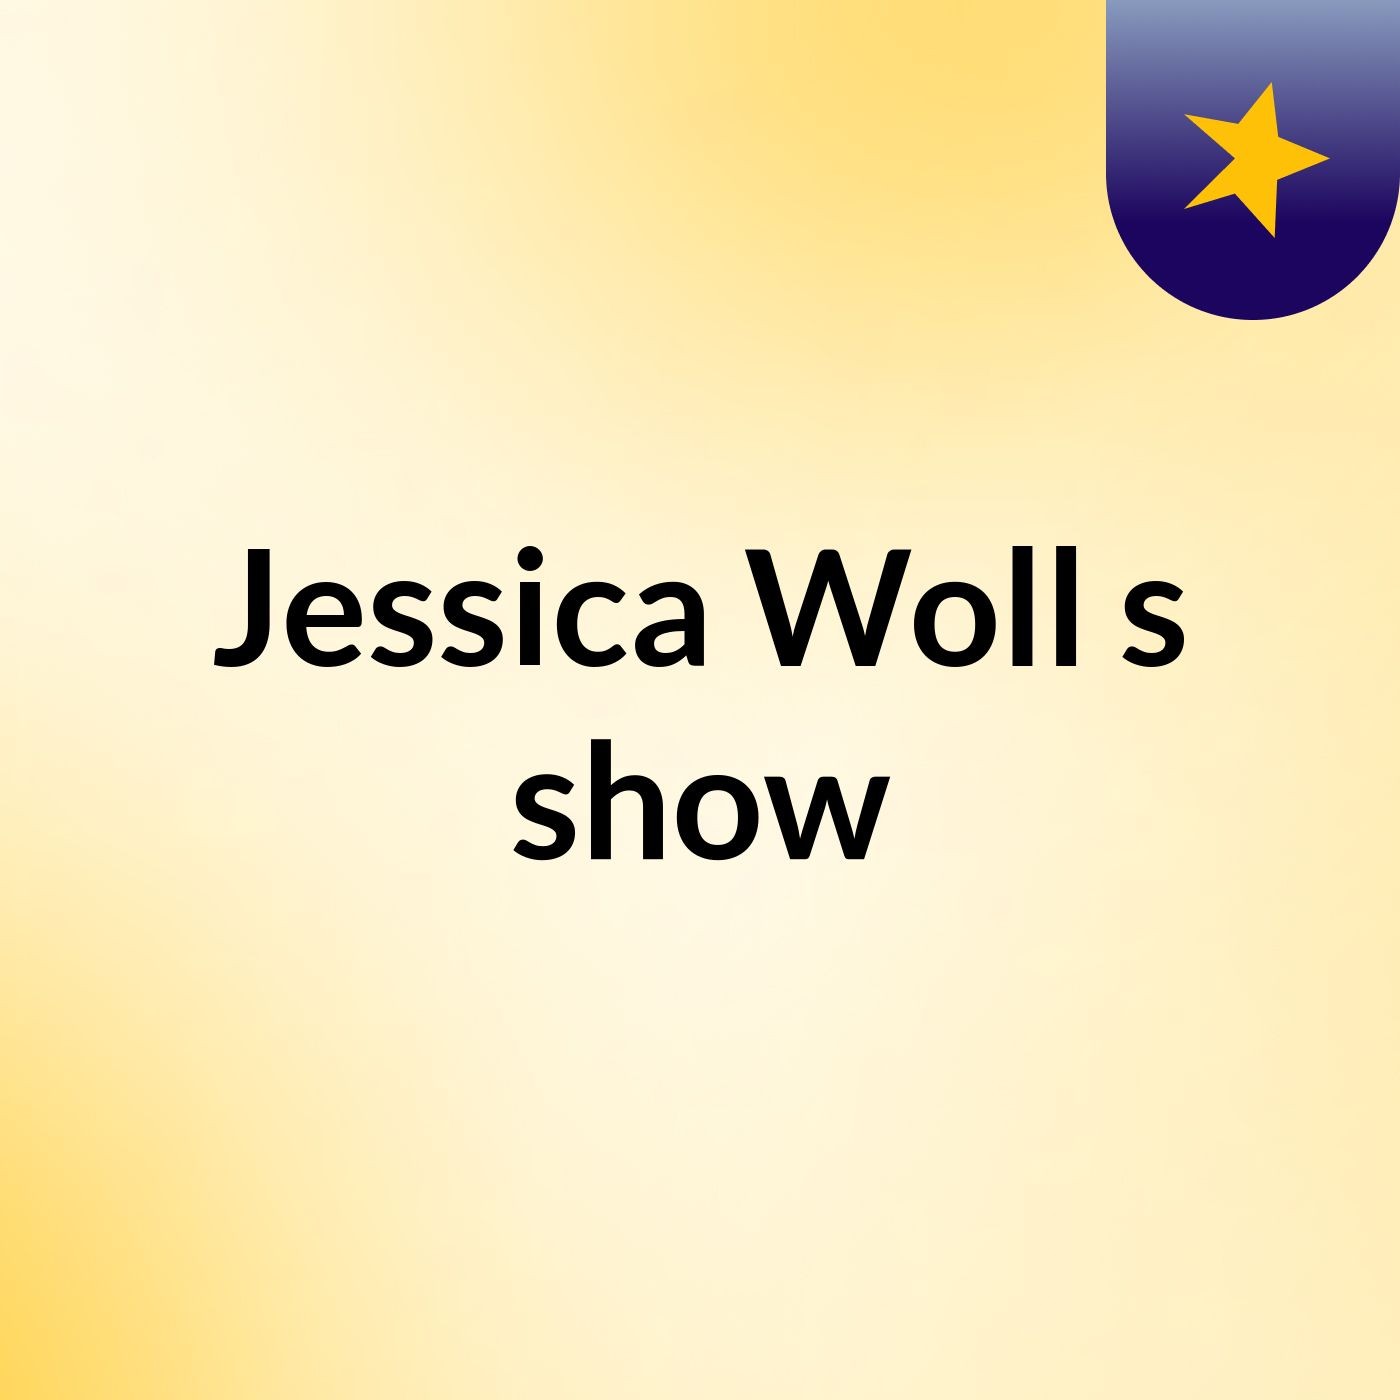 Jessica Woll's show